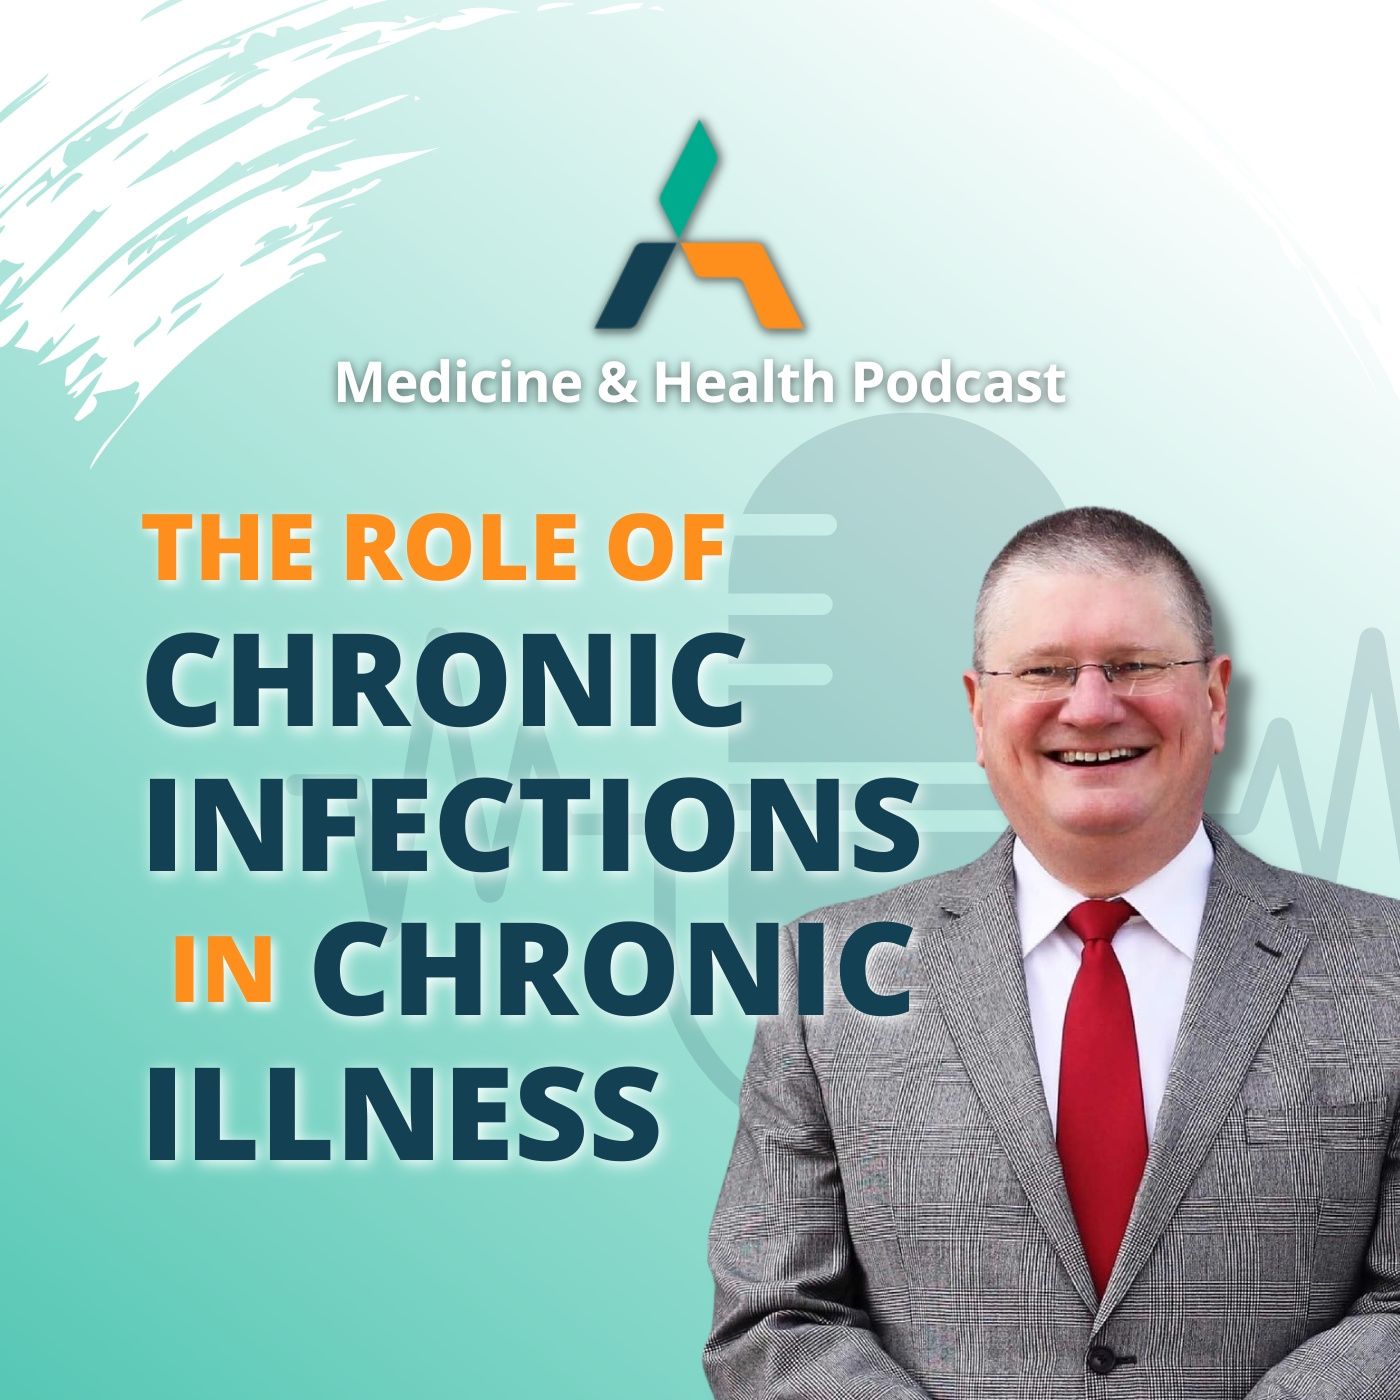 THE ROLE OF CHRONIC INFECTIONS IN CHRONIC ILLNESS